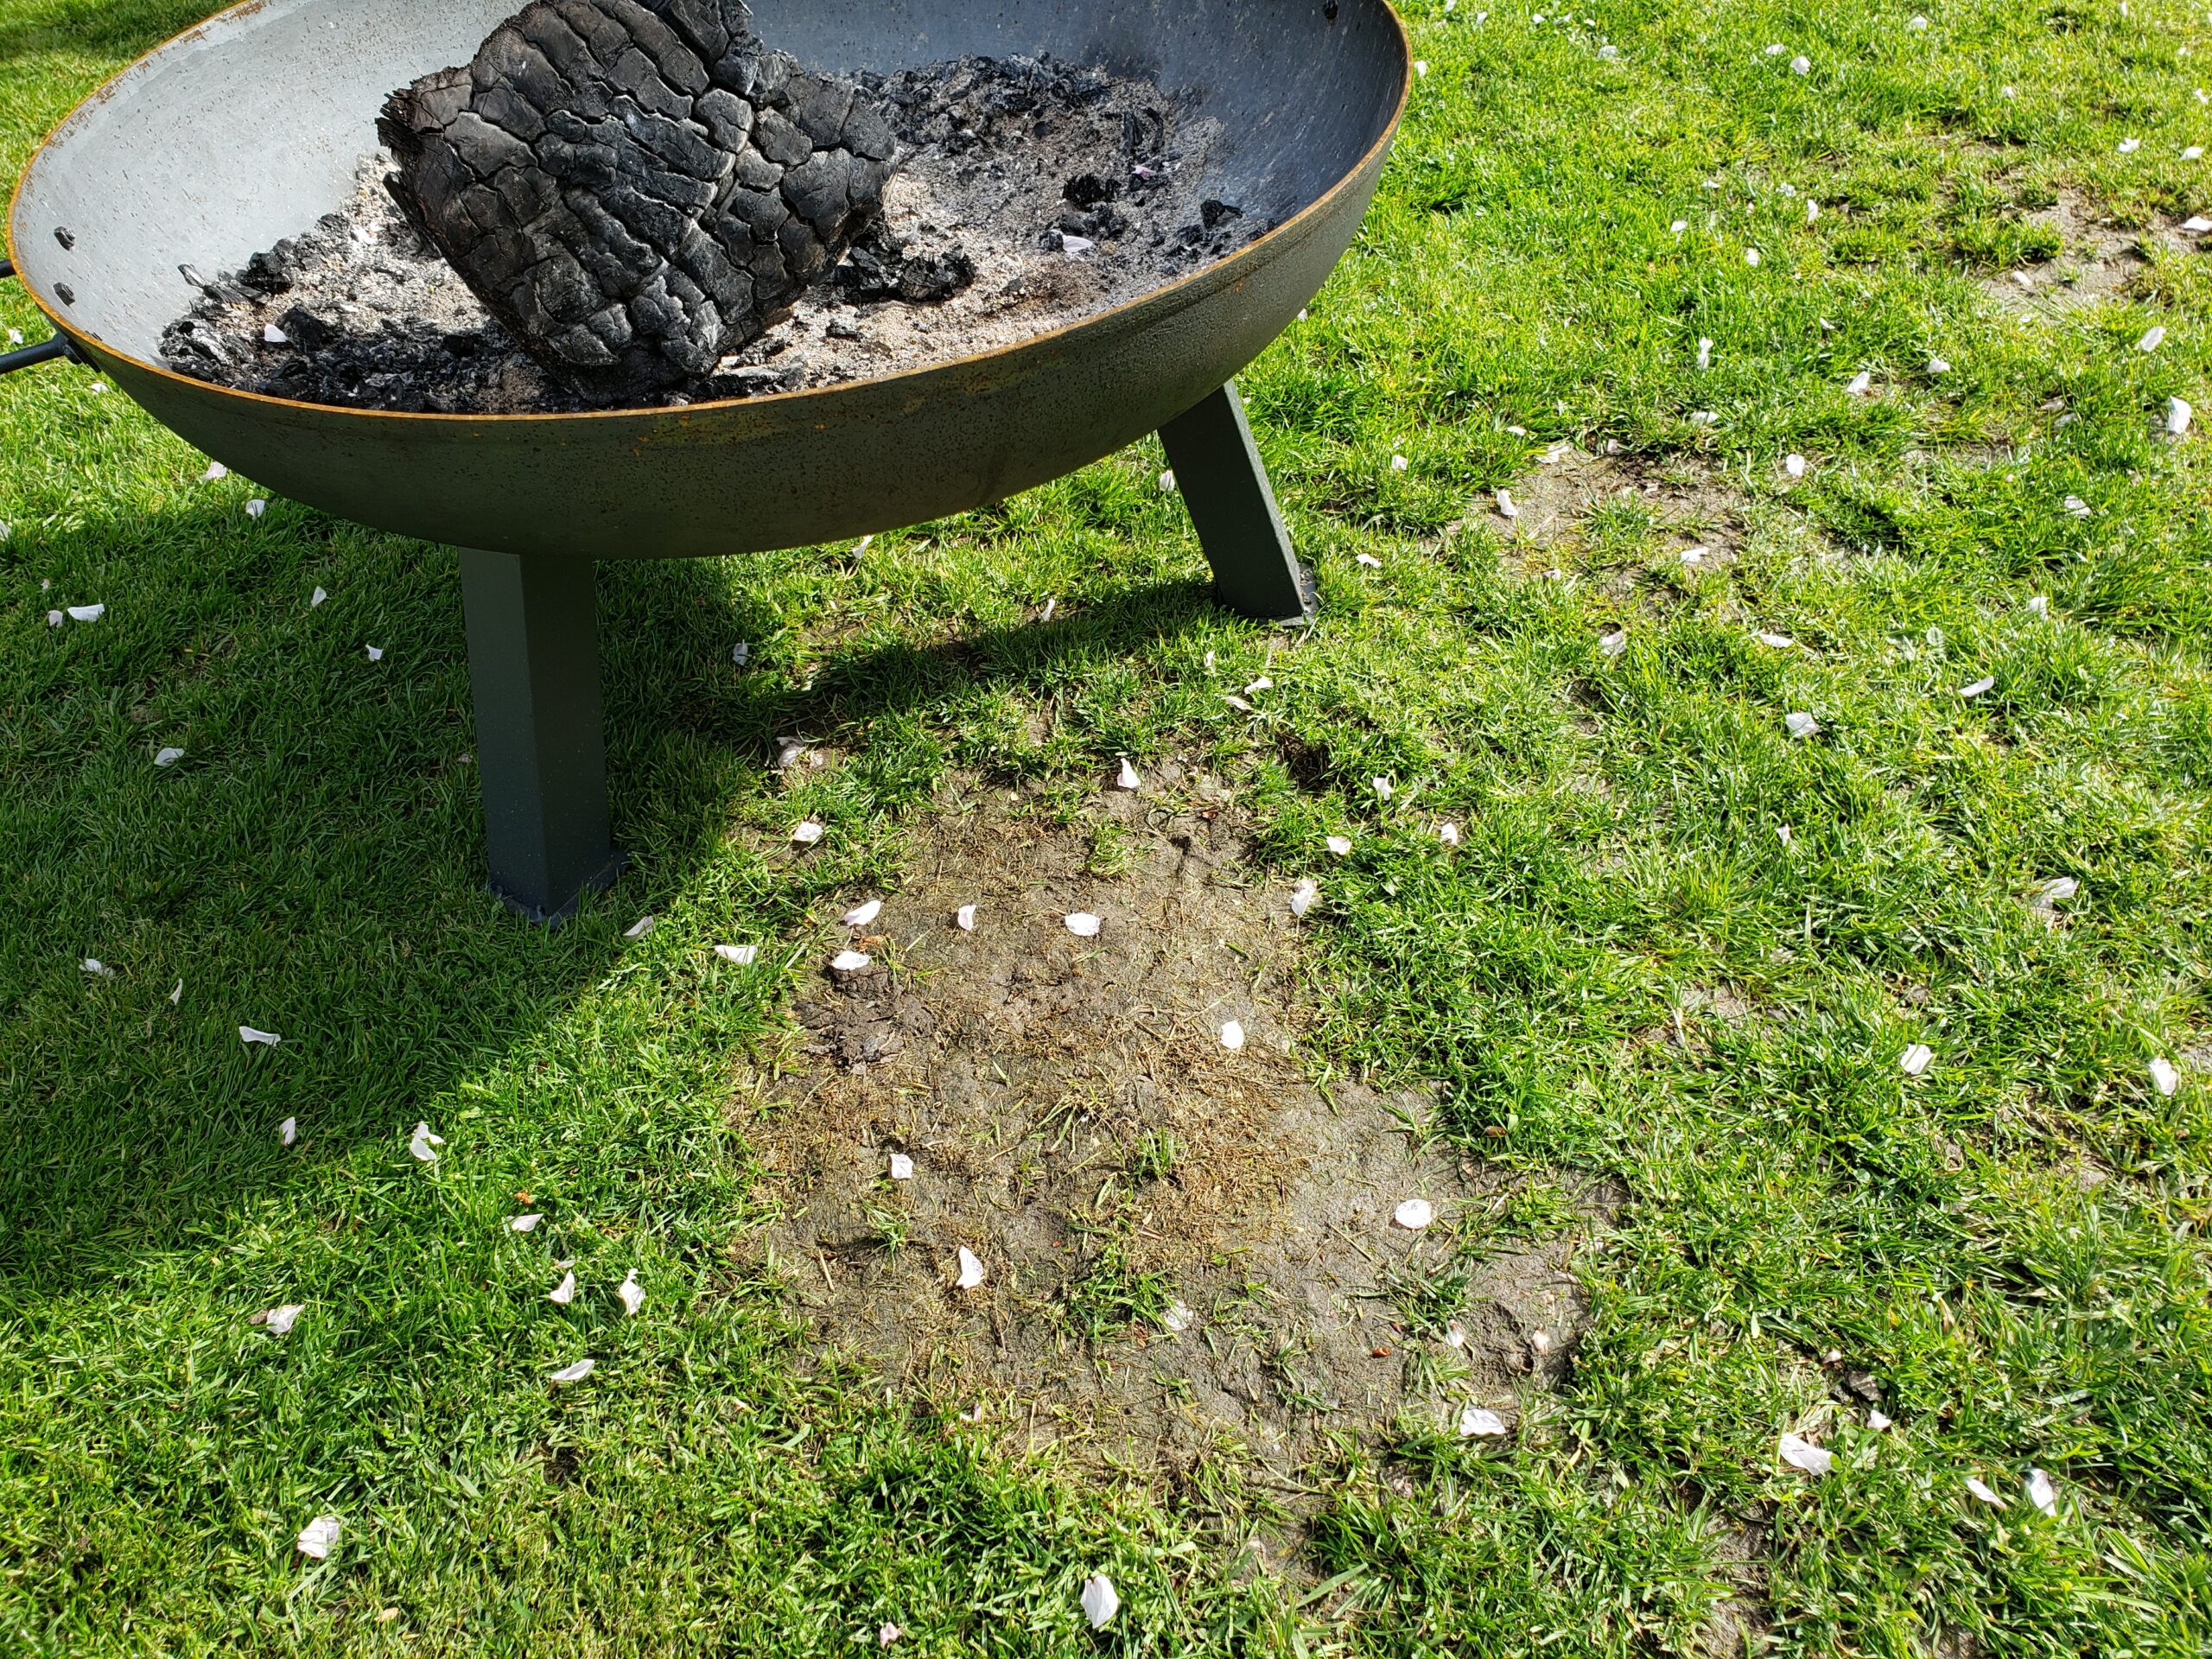 Fire Pit On Grass 5 Best Ways To, Can You Place A Propane Fire Pit On Grass